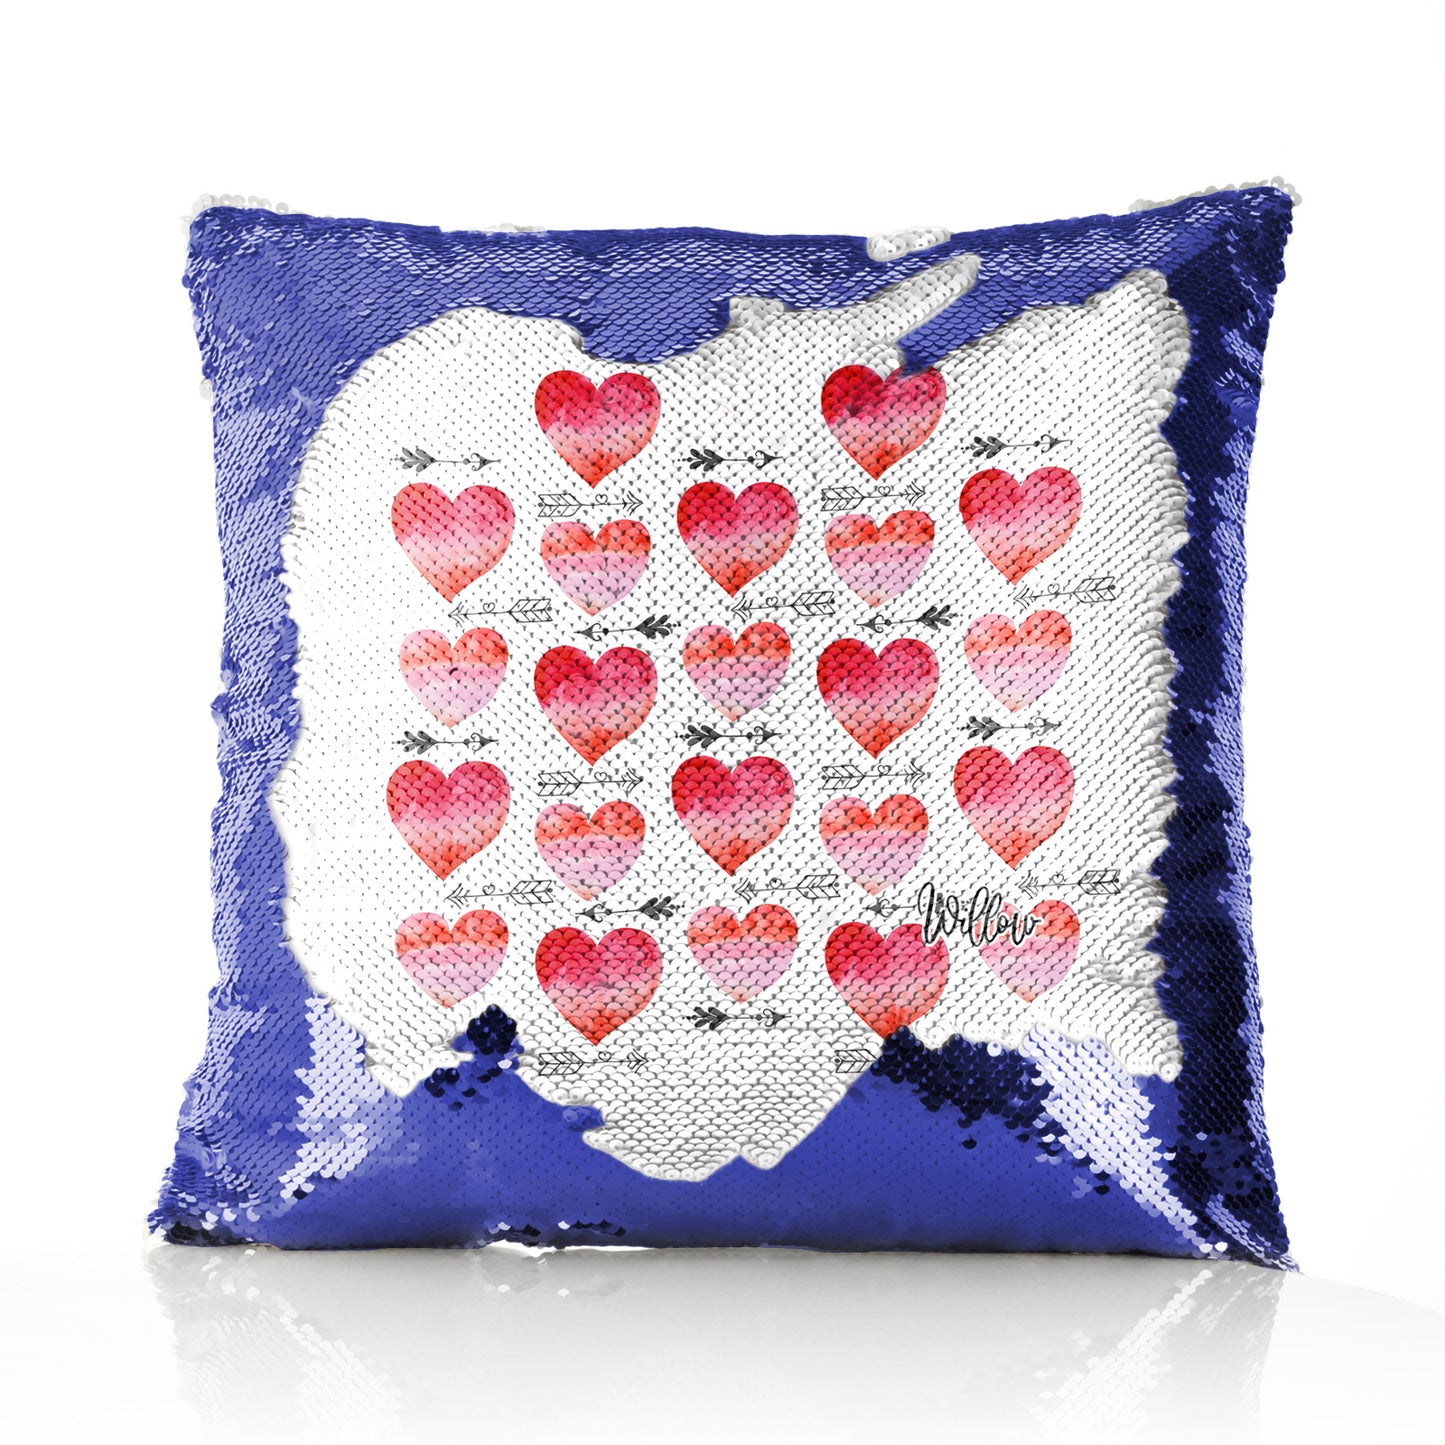 Personalised Sequin Cushion with Stylish Text and Arrow Love Hearts Print